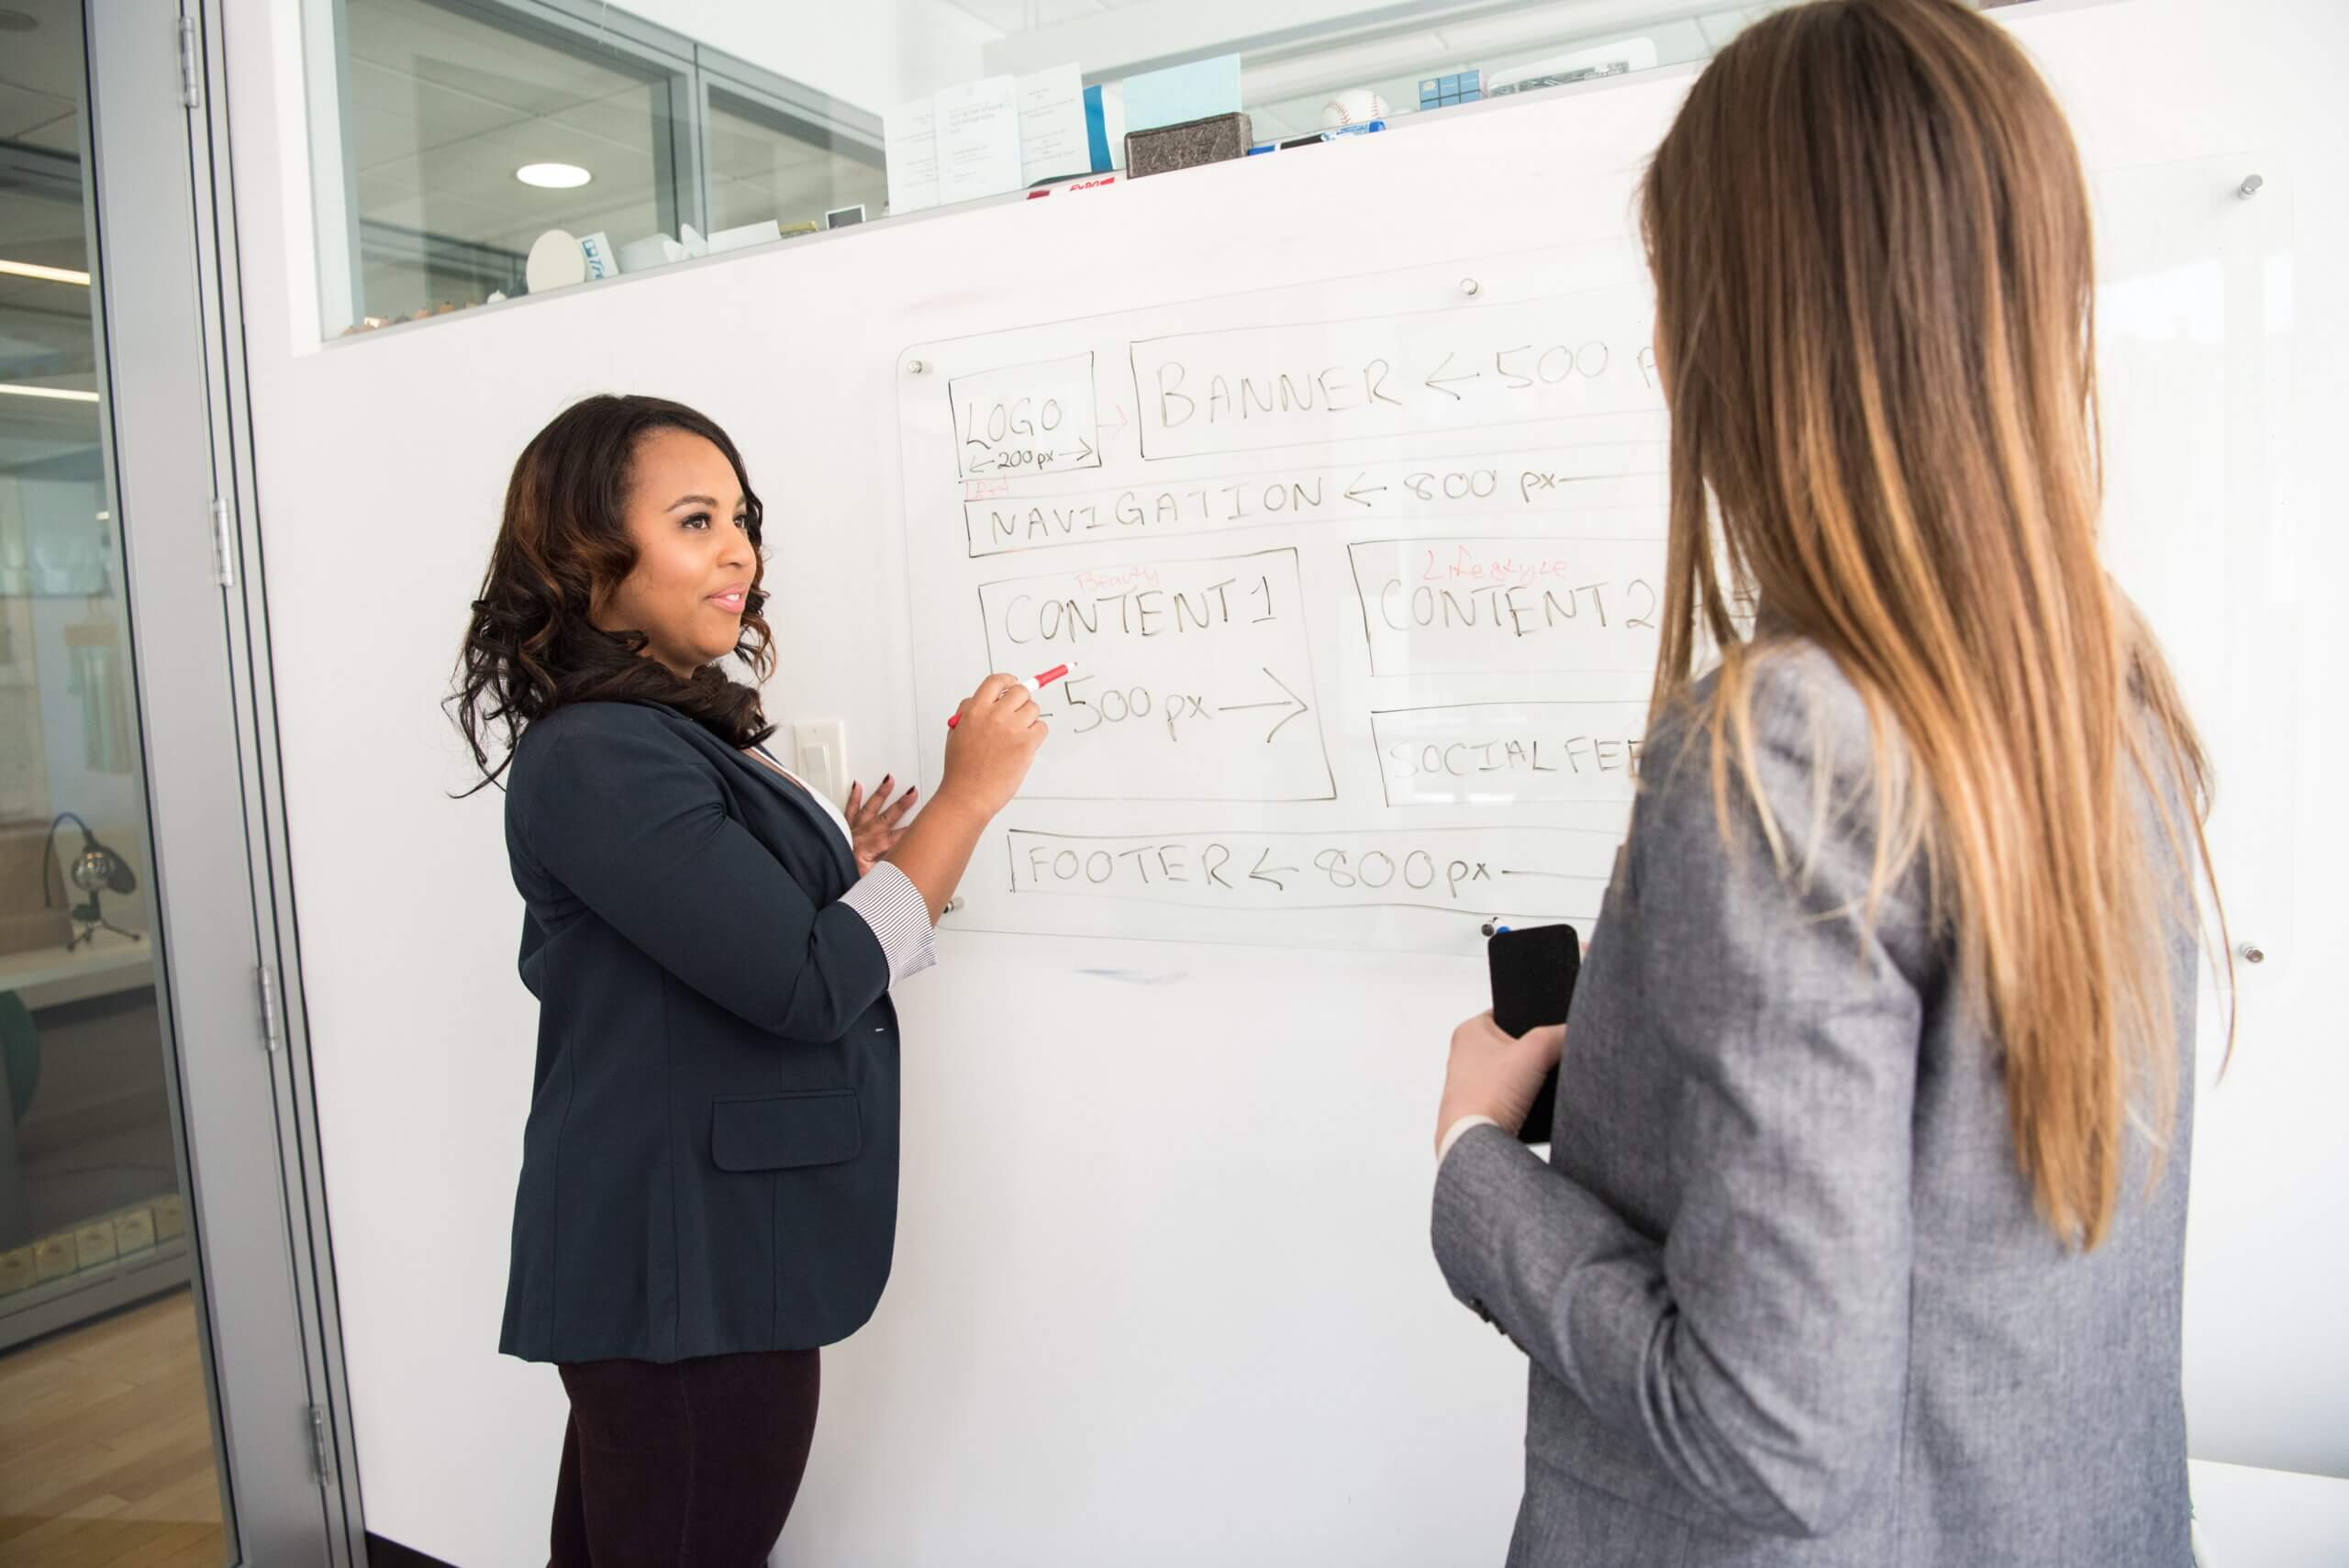 A business woman pointing towards the whiteboard while presenting